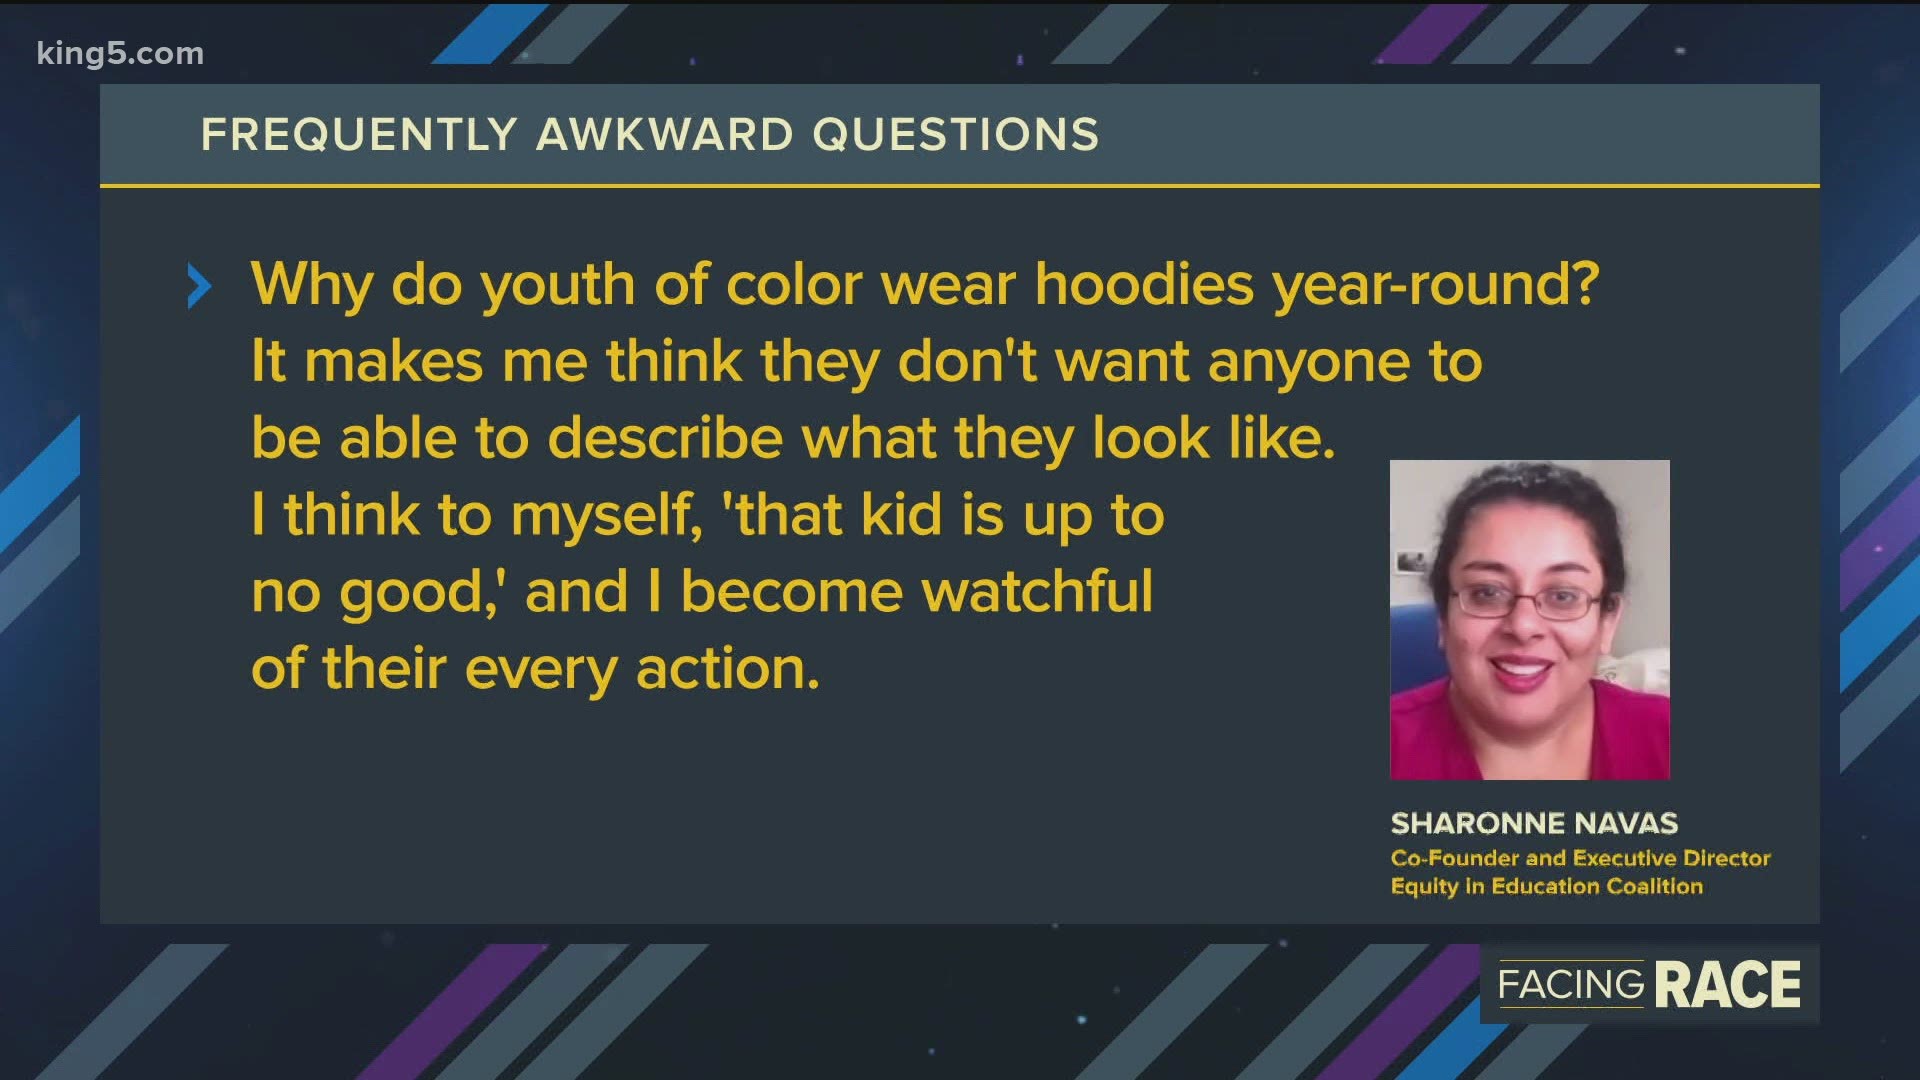 Sharonne Navas, executive director of the Equity in Education Coalition, weighs in on why youth of color wear hoodies year-round.